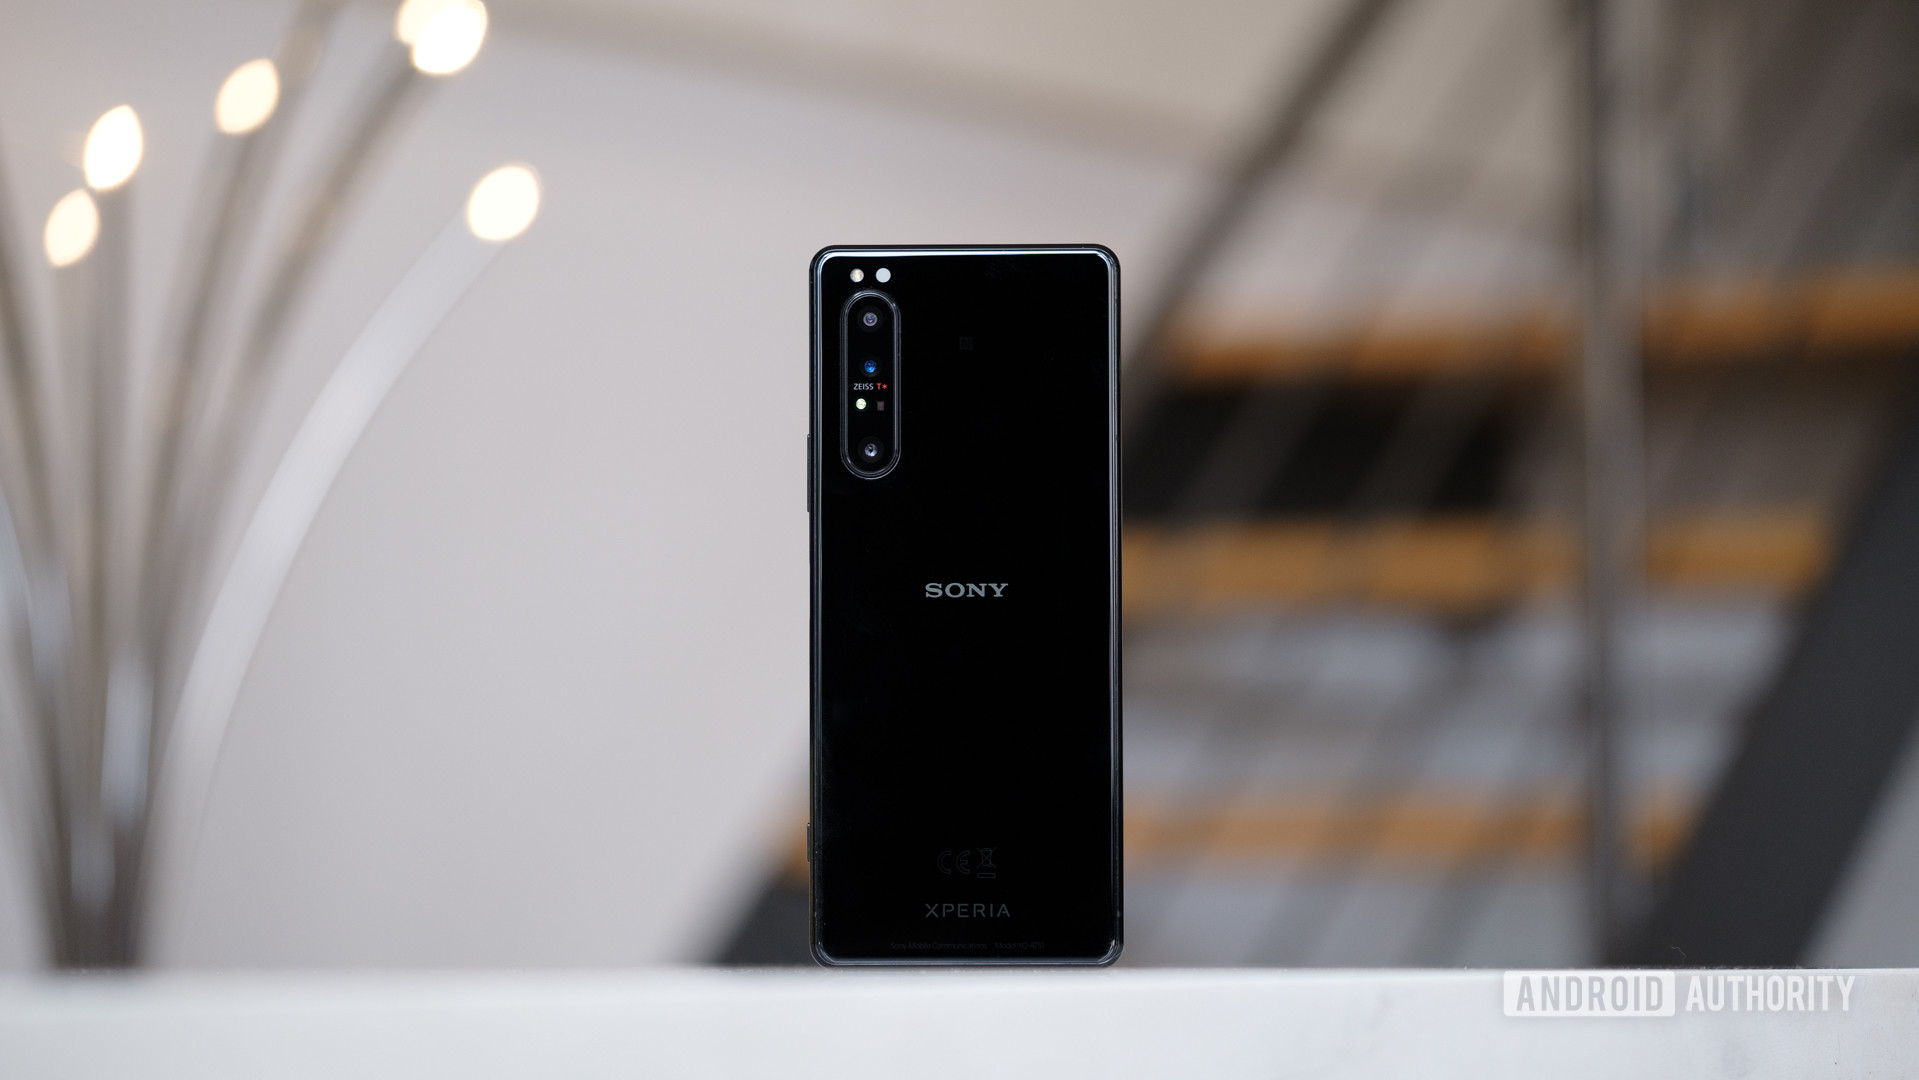 Sony Xperia 1 II review: A Sony phone I'd love to keep in my 